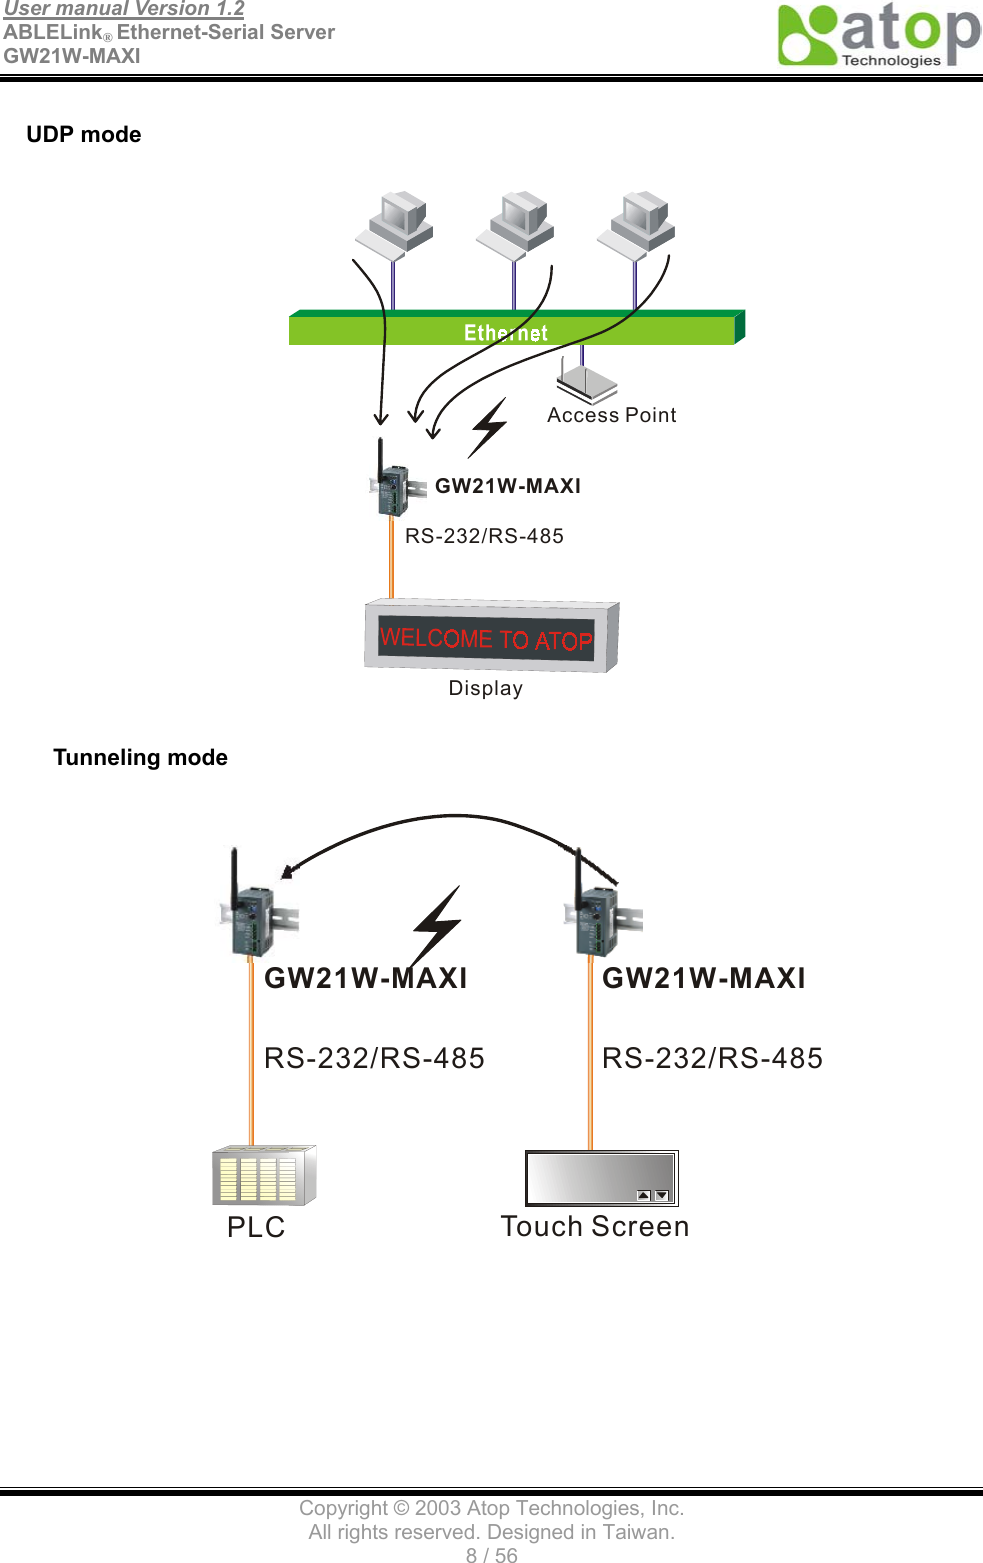 User manual Version 1.2 ABLELink® Ethernet-Serial Server   GW21W-MAXI                                      Copyright © 2003 Atop Technologies, Inc. All rights reserved. Designed in Taiwan. 8 / 56   UDP mode  GW21W-MAXIAccess PointRS-232/RS-485Display   Tunneling mode  GW21W-MAXI GW21W-MAXIRS-232/RS-485 RS-232/RS-485PLC Touch Screen 